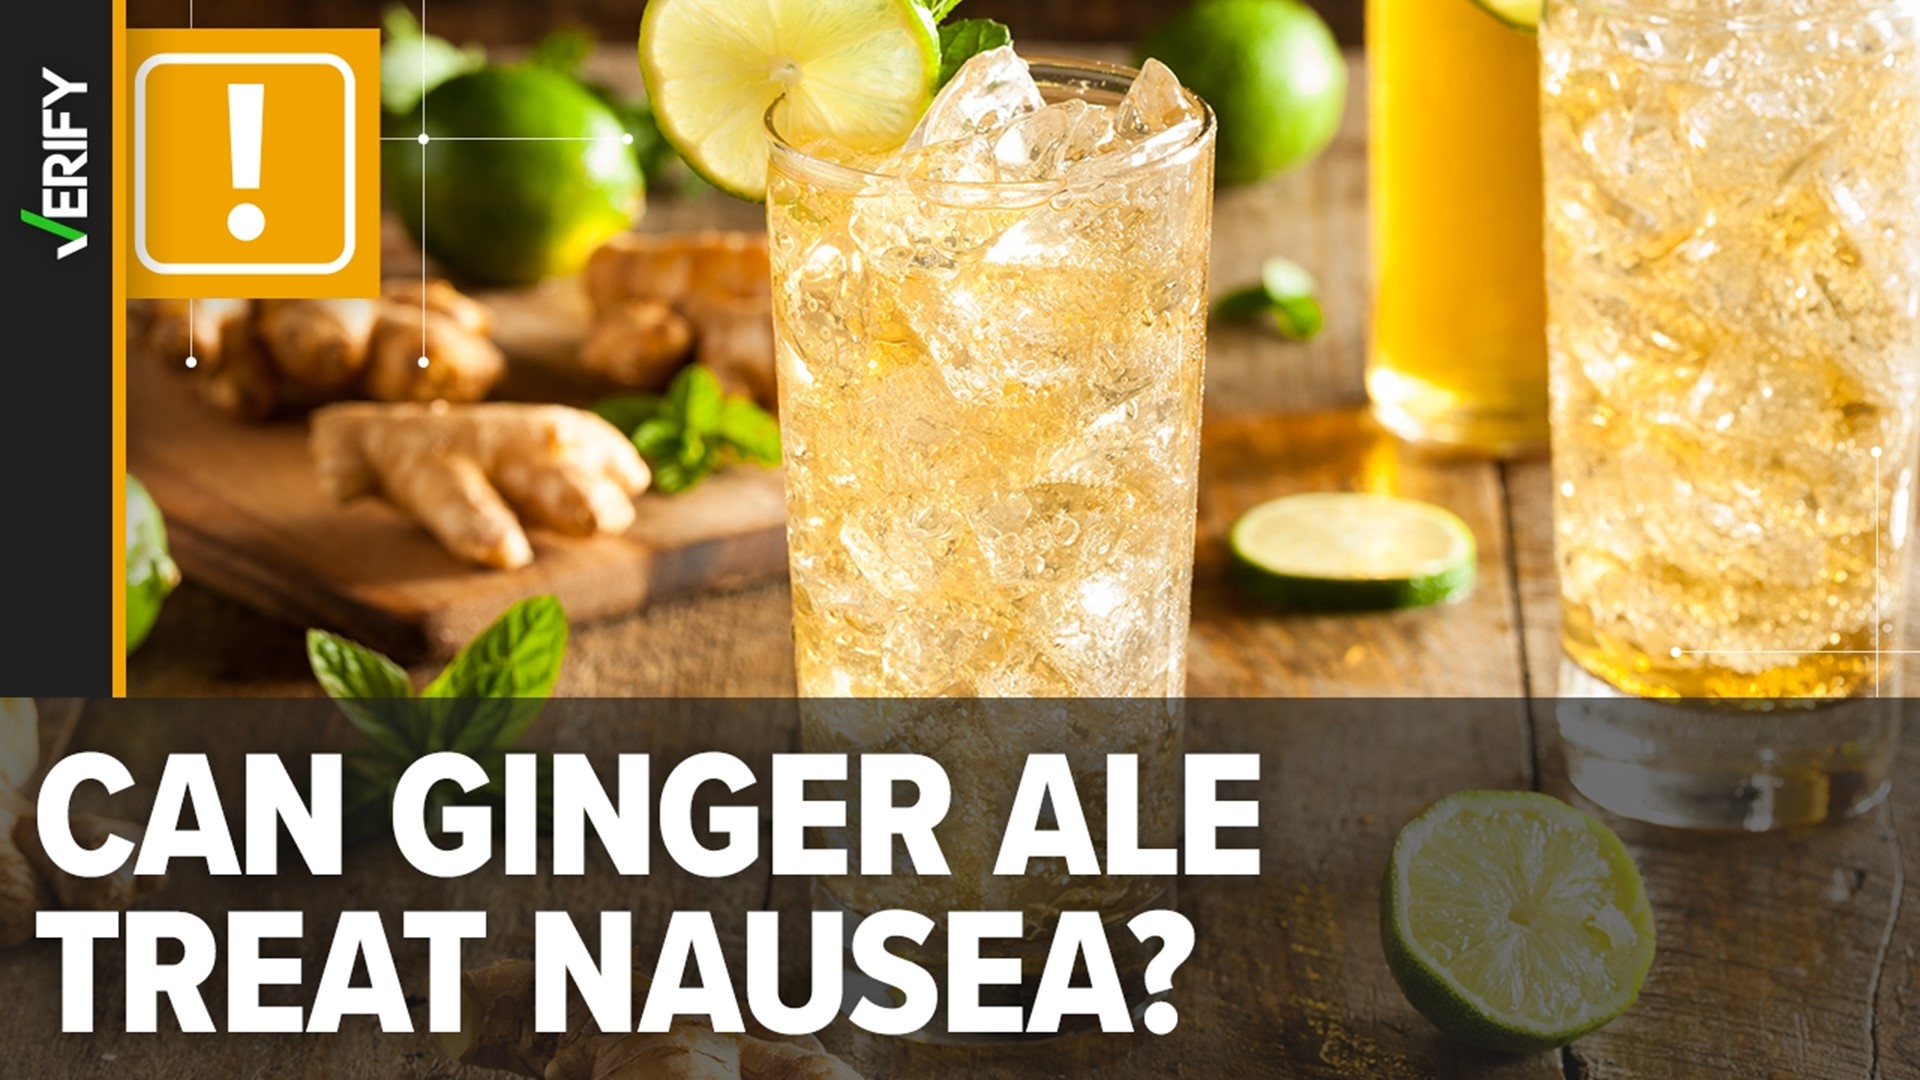 Ginger ale may be a household go-to for an upset stomach, but 
 most don't actually contain real ginger and the sugar in the soda could make things worse.